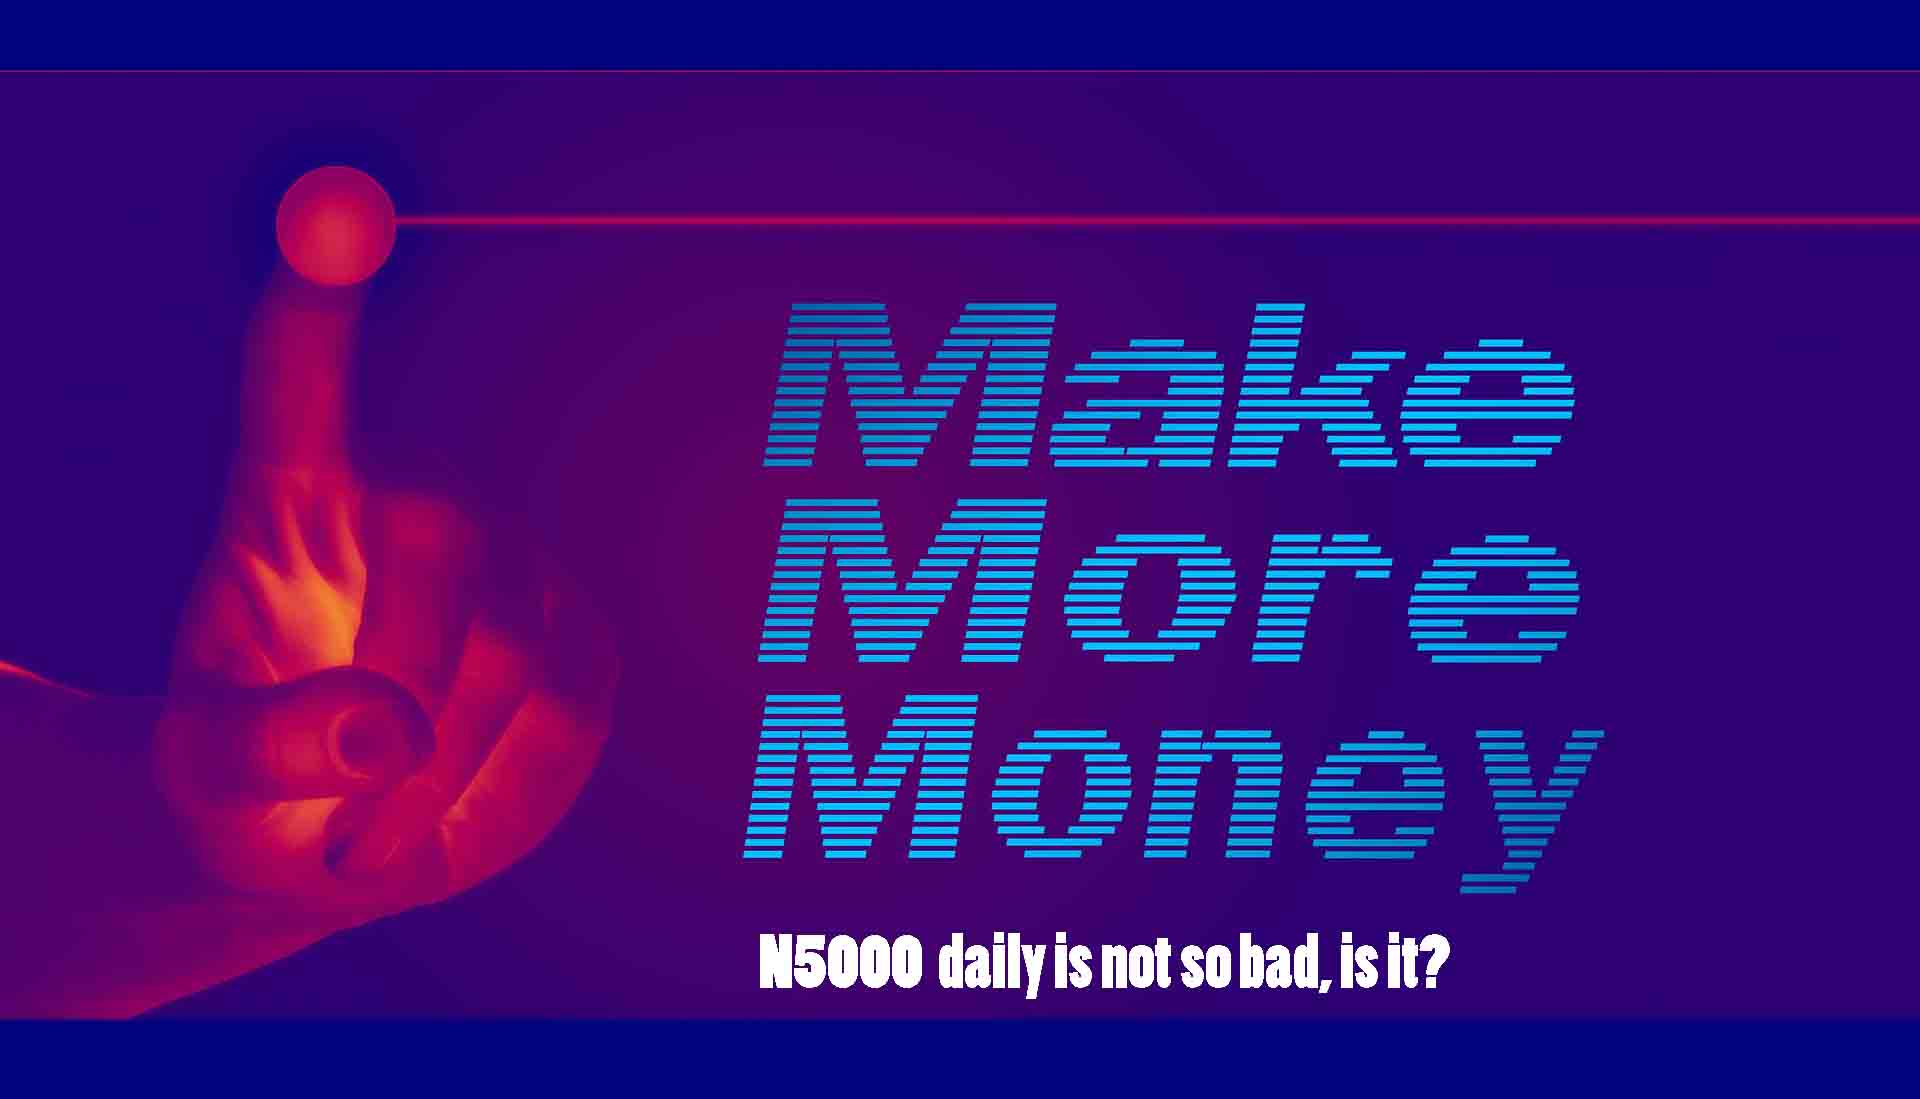 Make more money; N5000 daily is not so bad, is it?